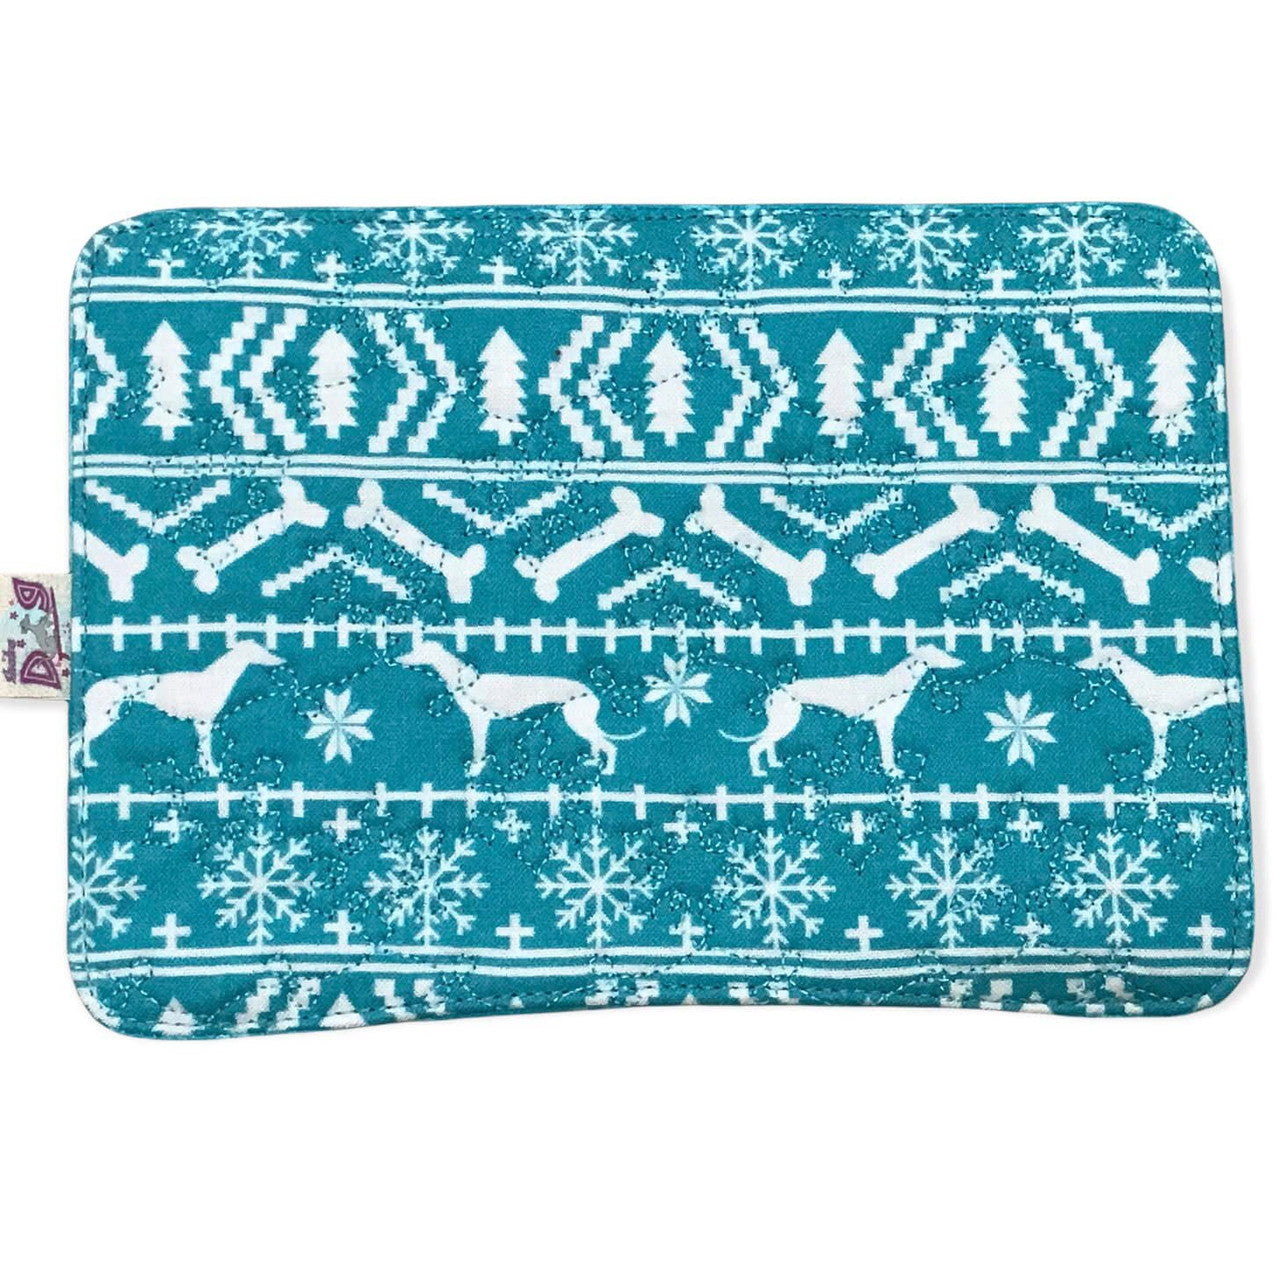 Mug Rug - Nordic Hounds Quilted Snowflakes